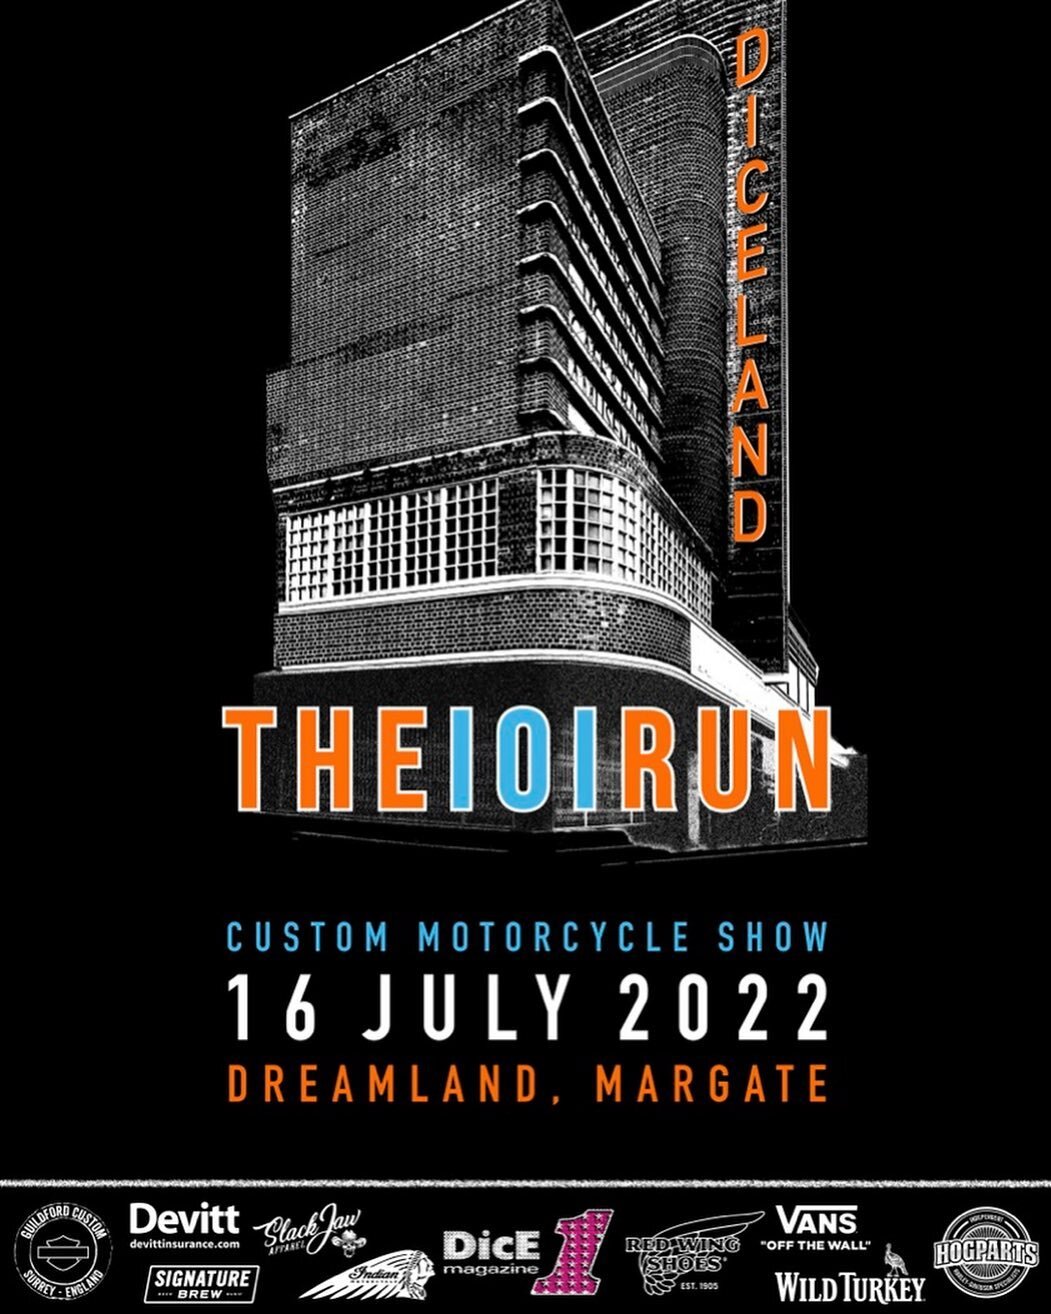 Those nice people at @dicemagazine are back with another @the101run and this time at the art and culture hub (in some bits) of Margate. This will be a good one!